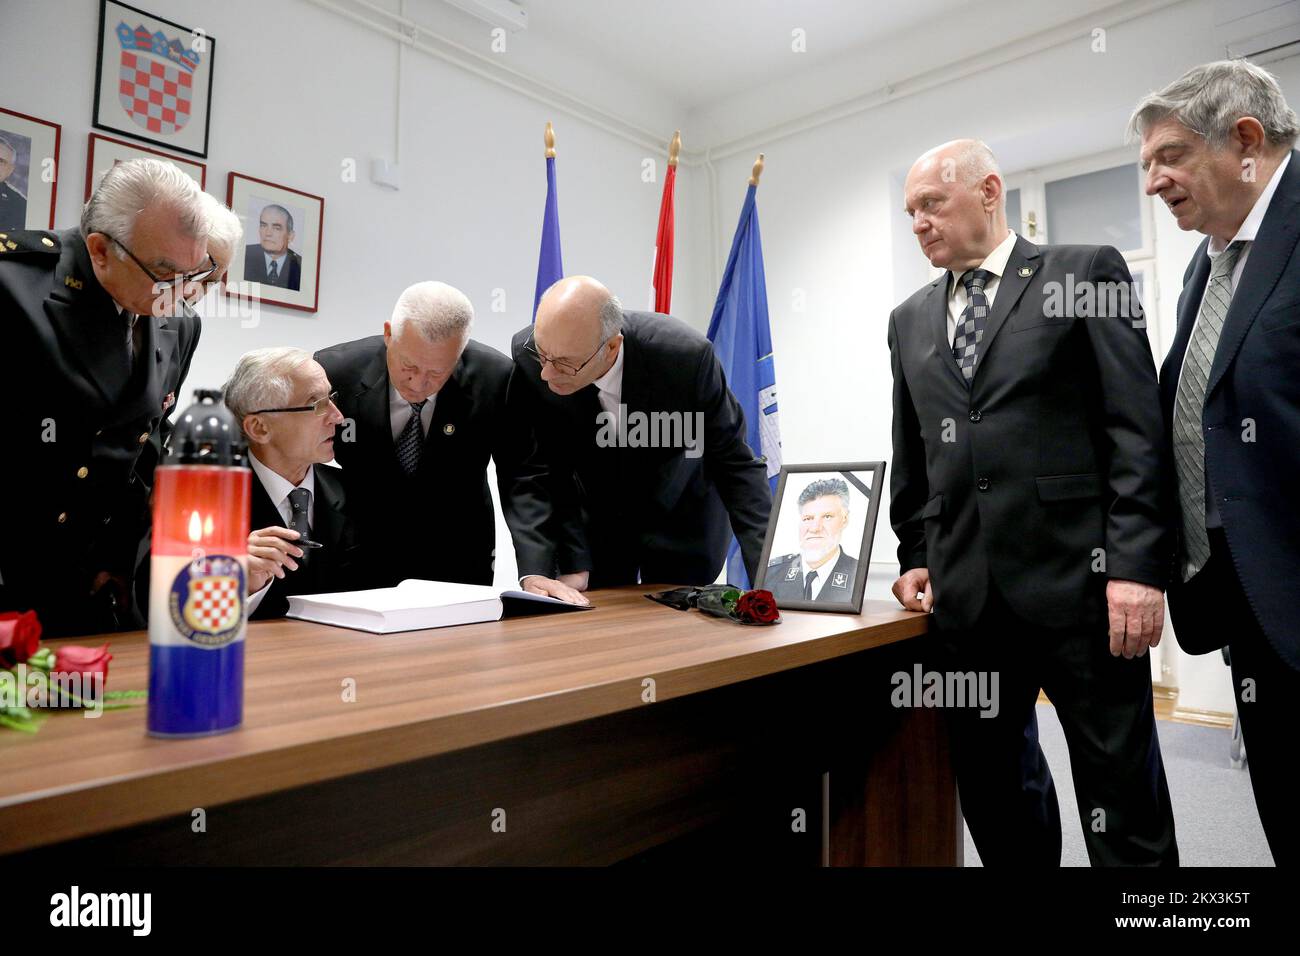 01.12.2017., Zagreb, Croatia - The Croatian Generala Association has opened a mourning book for death of Slobodan Praljak, who died after appearing to drink poison at court in The Hague as UN judges upheld his 20-year sentence. Ivan Tolj, Pavao Miljavac. Photo: Patrik Macek/PIXSELL Stock Photo